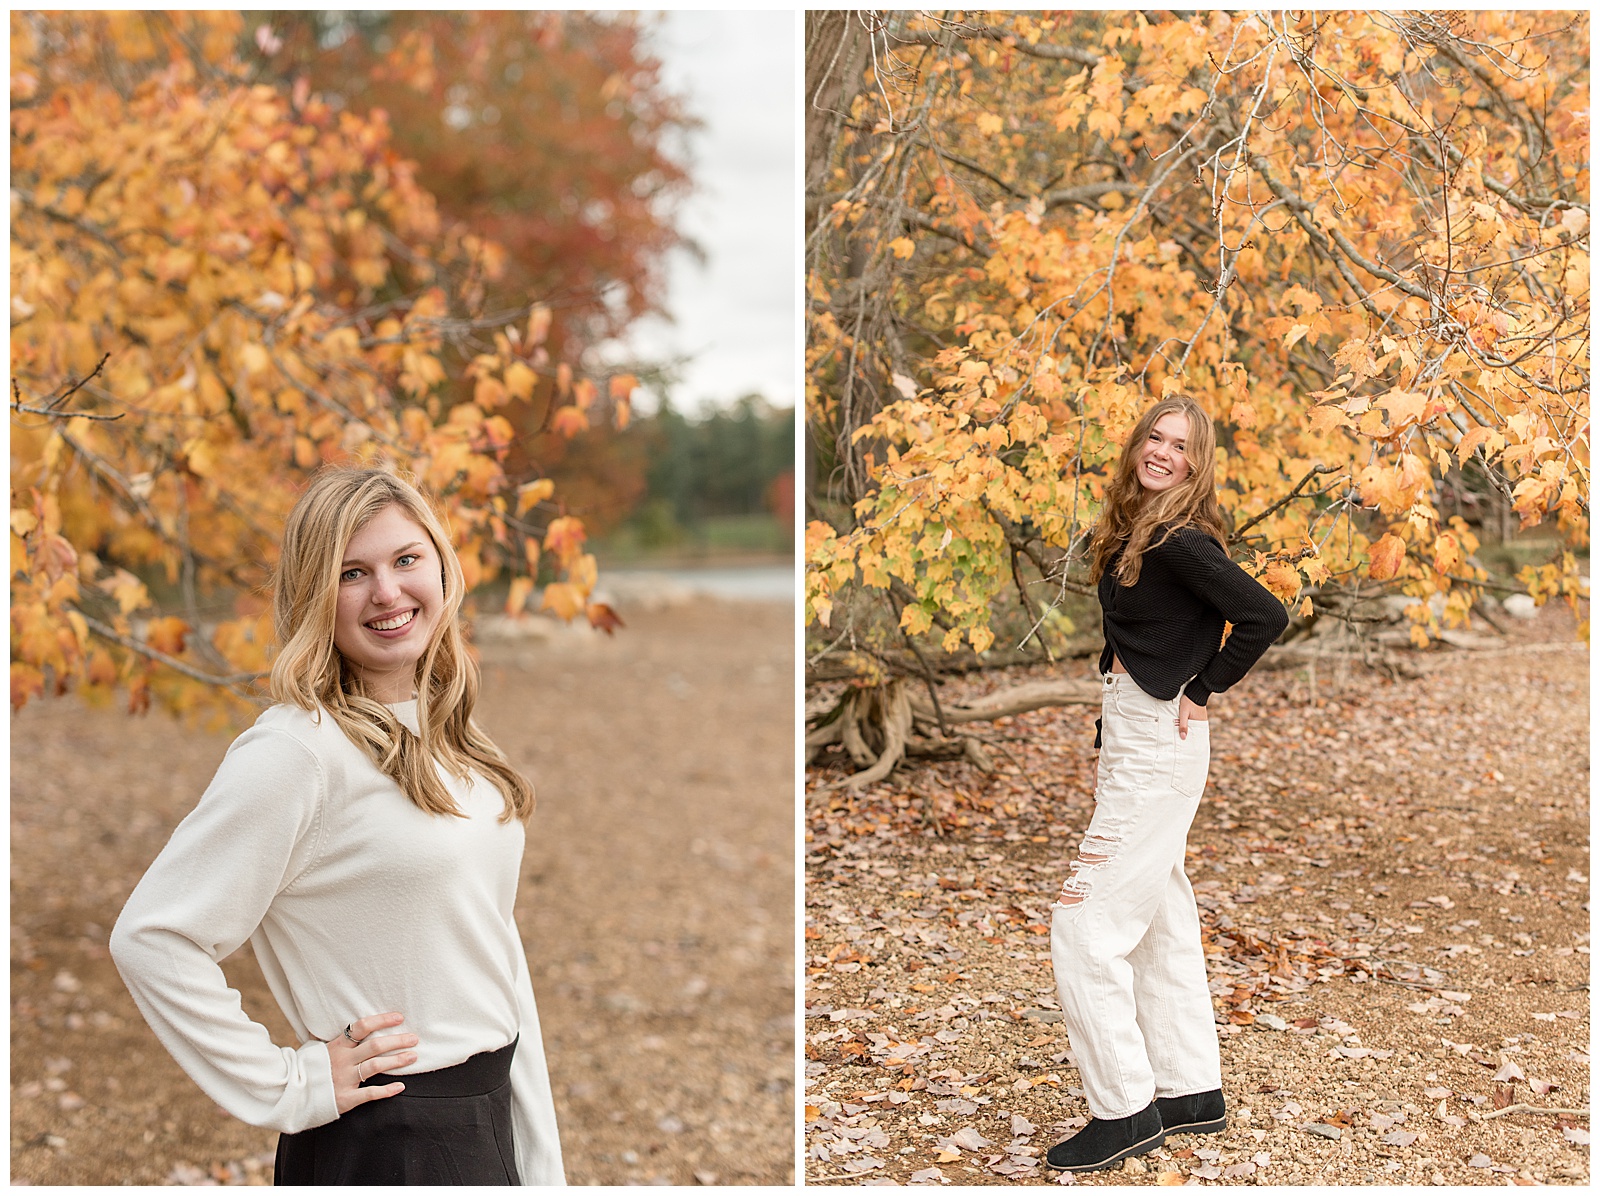 senior girl spokesmodel with hand on hip wearing black and ivory outfit with right shoulder toward camera on fall day